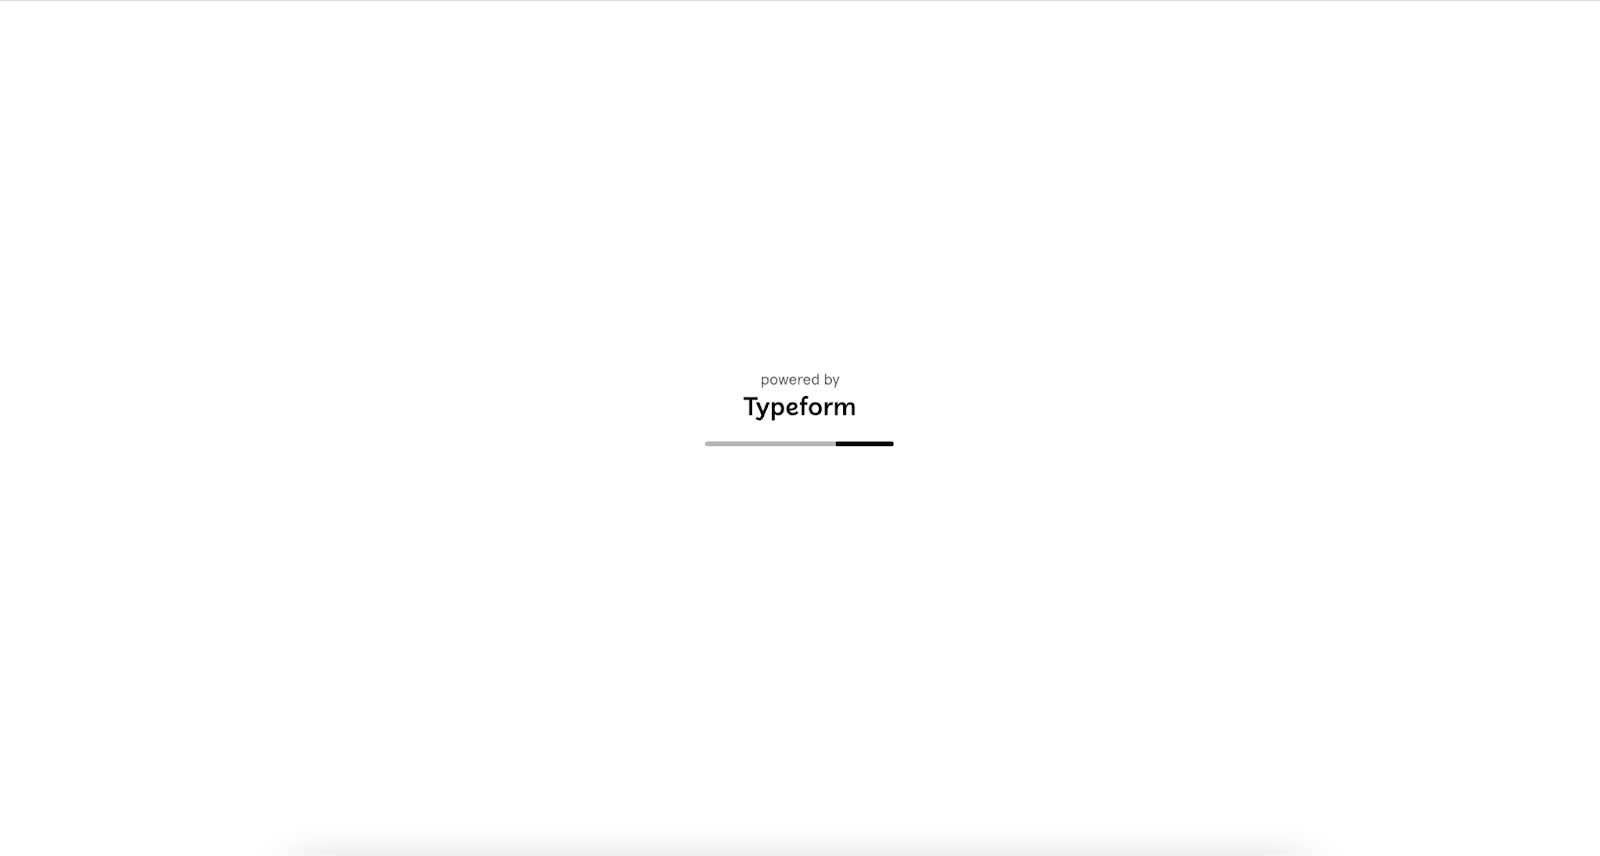 Branding tag example from Typeform